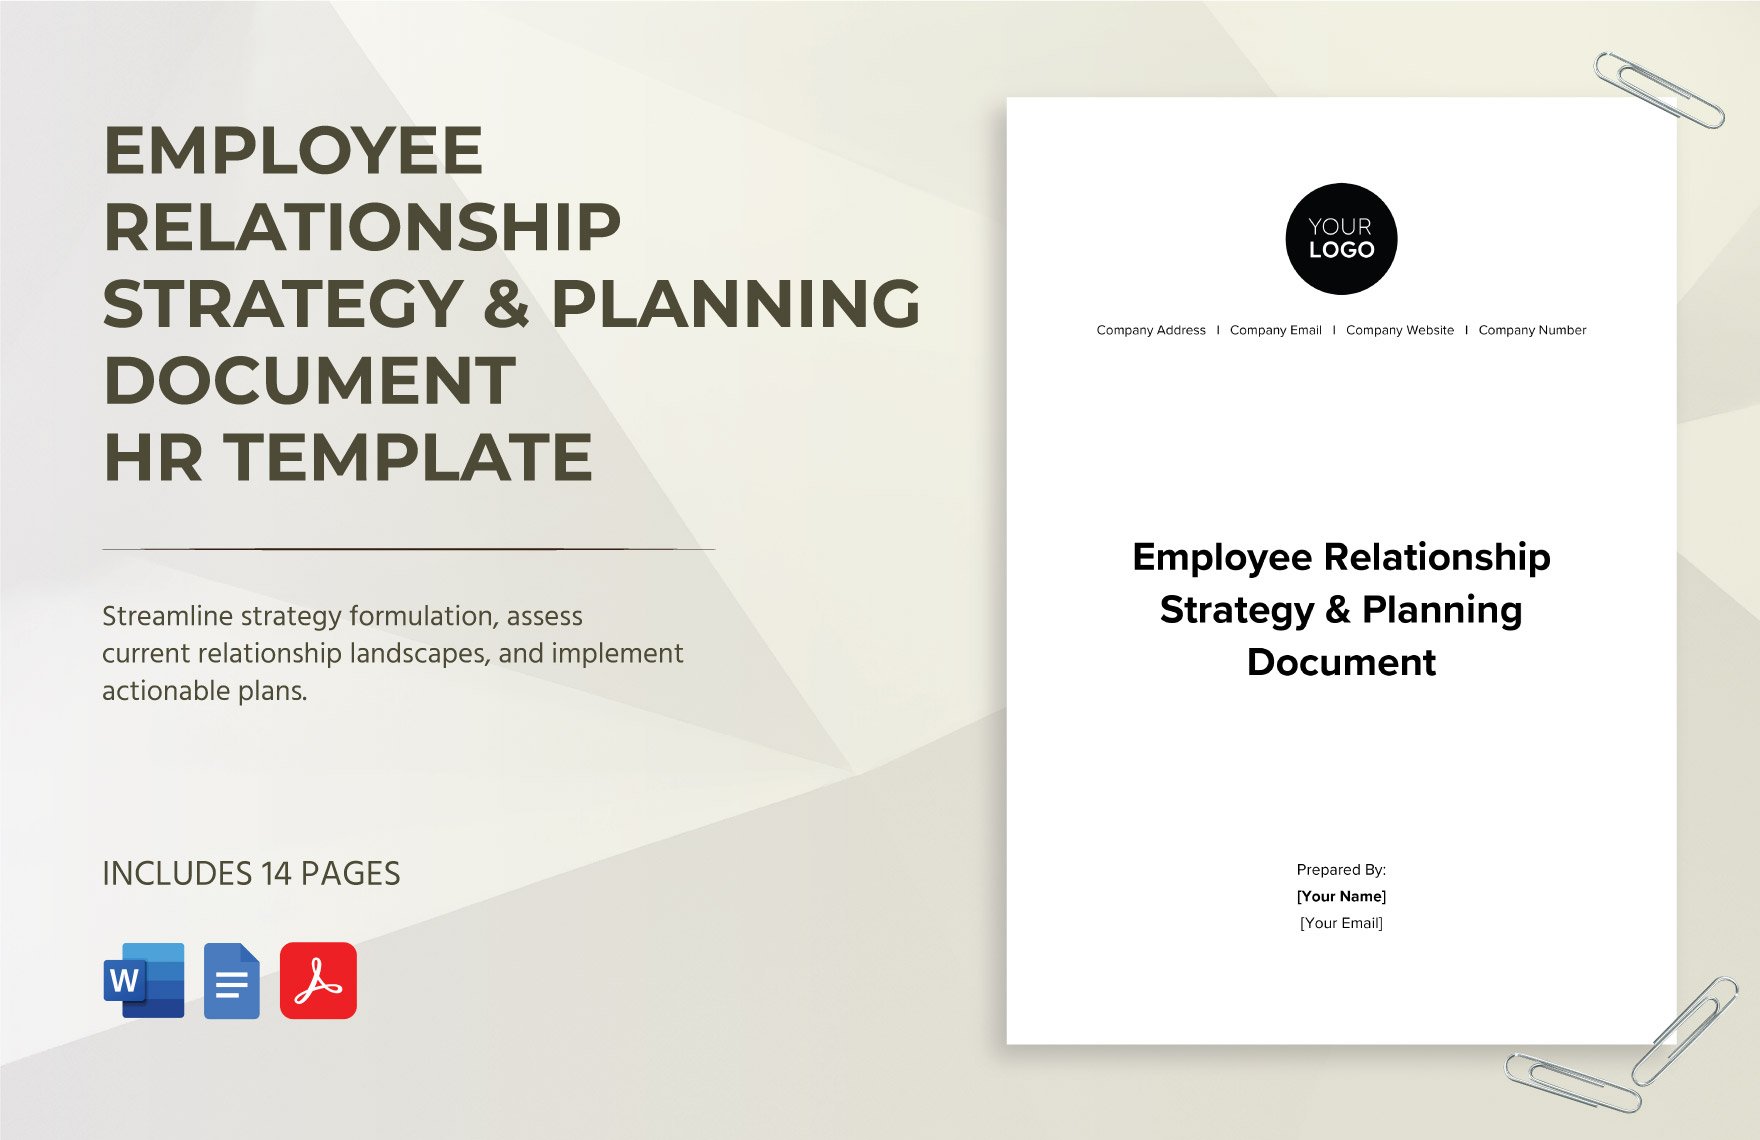 Employee Relationship Strategy & Planning Document HR Template